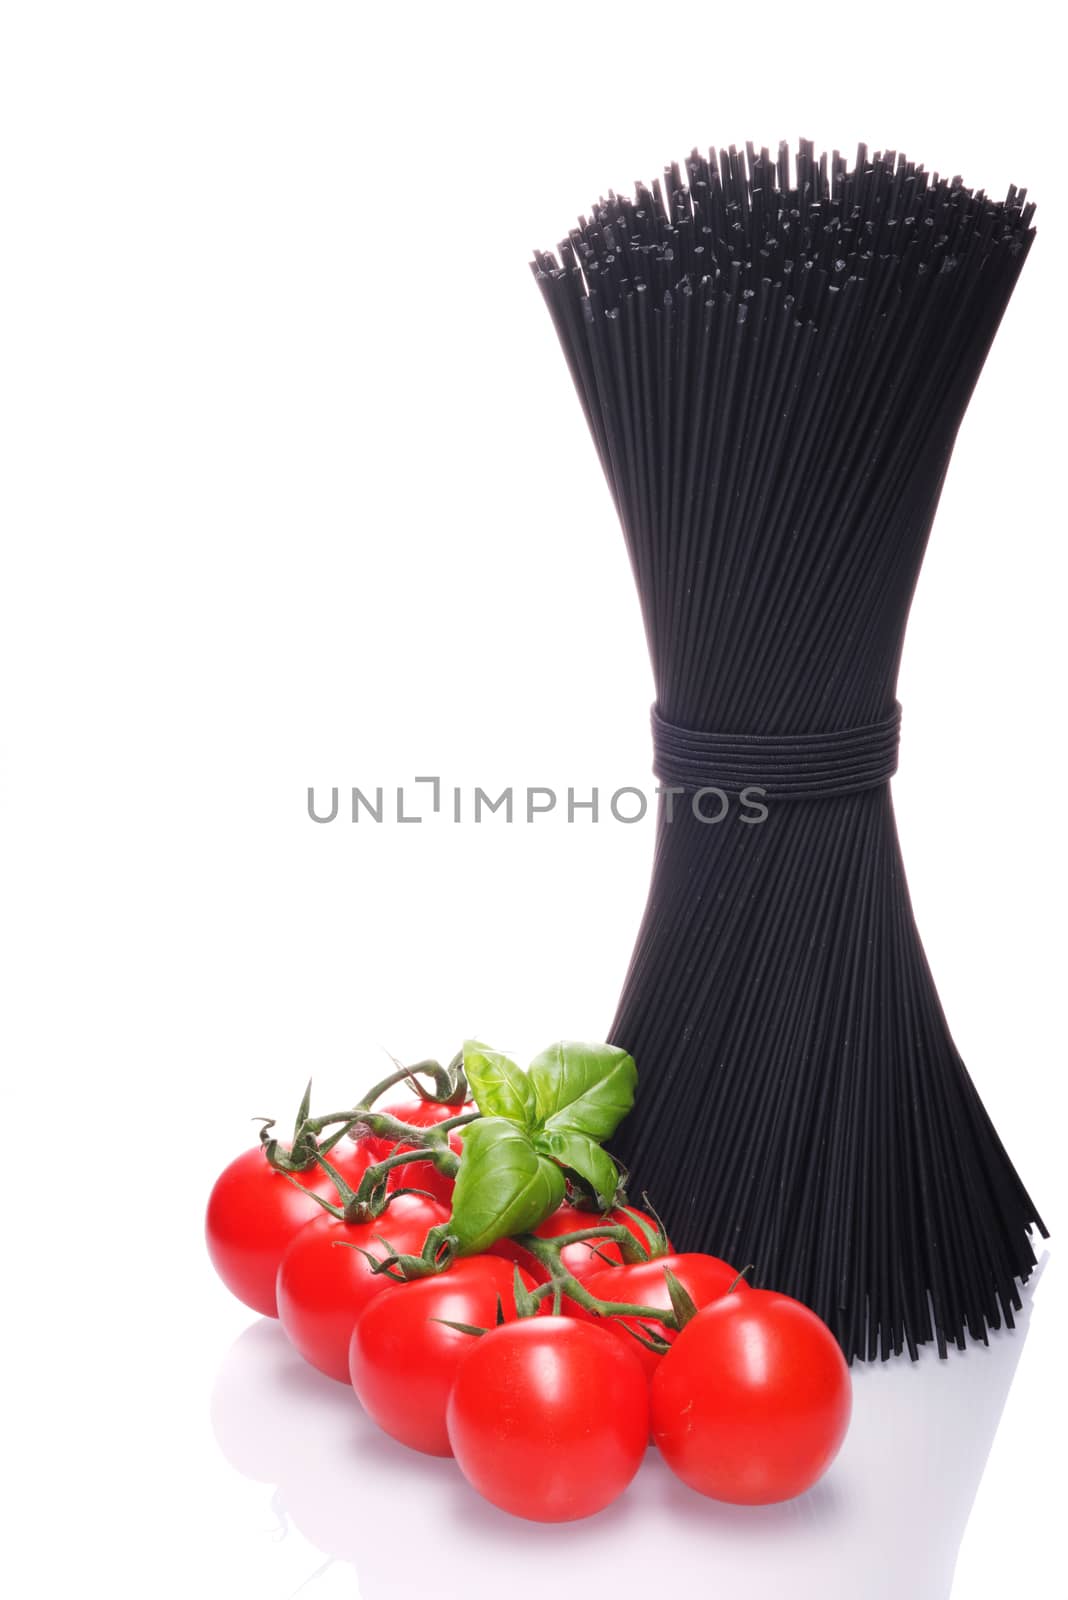 Black spaghetti with basel leaves and red tomato on white background.